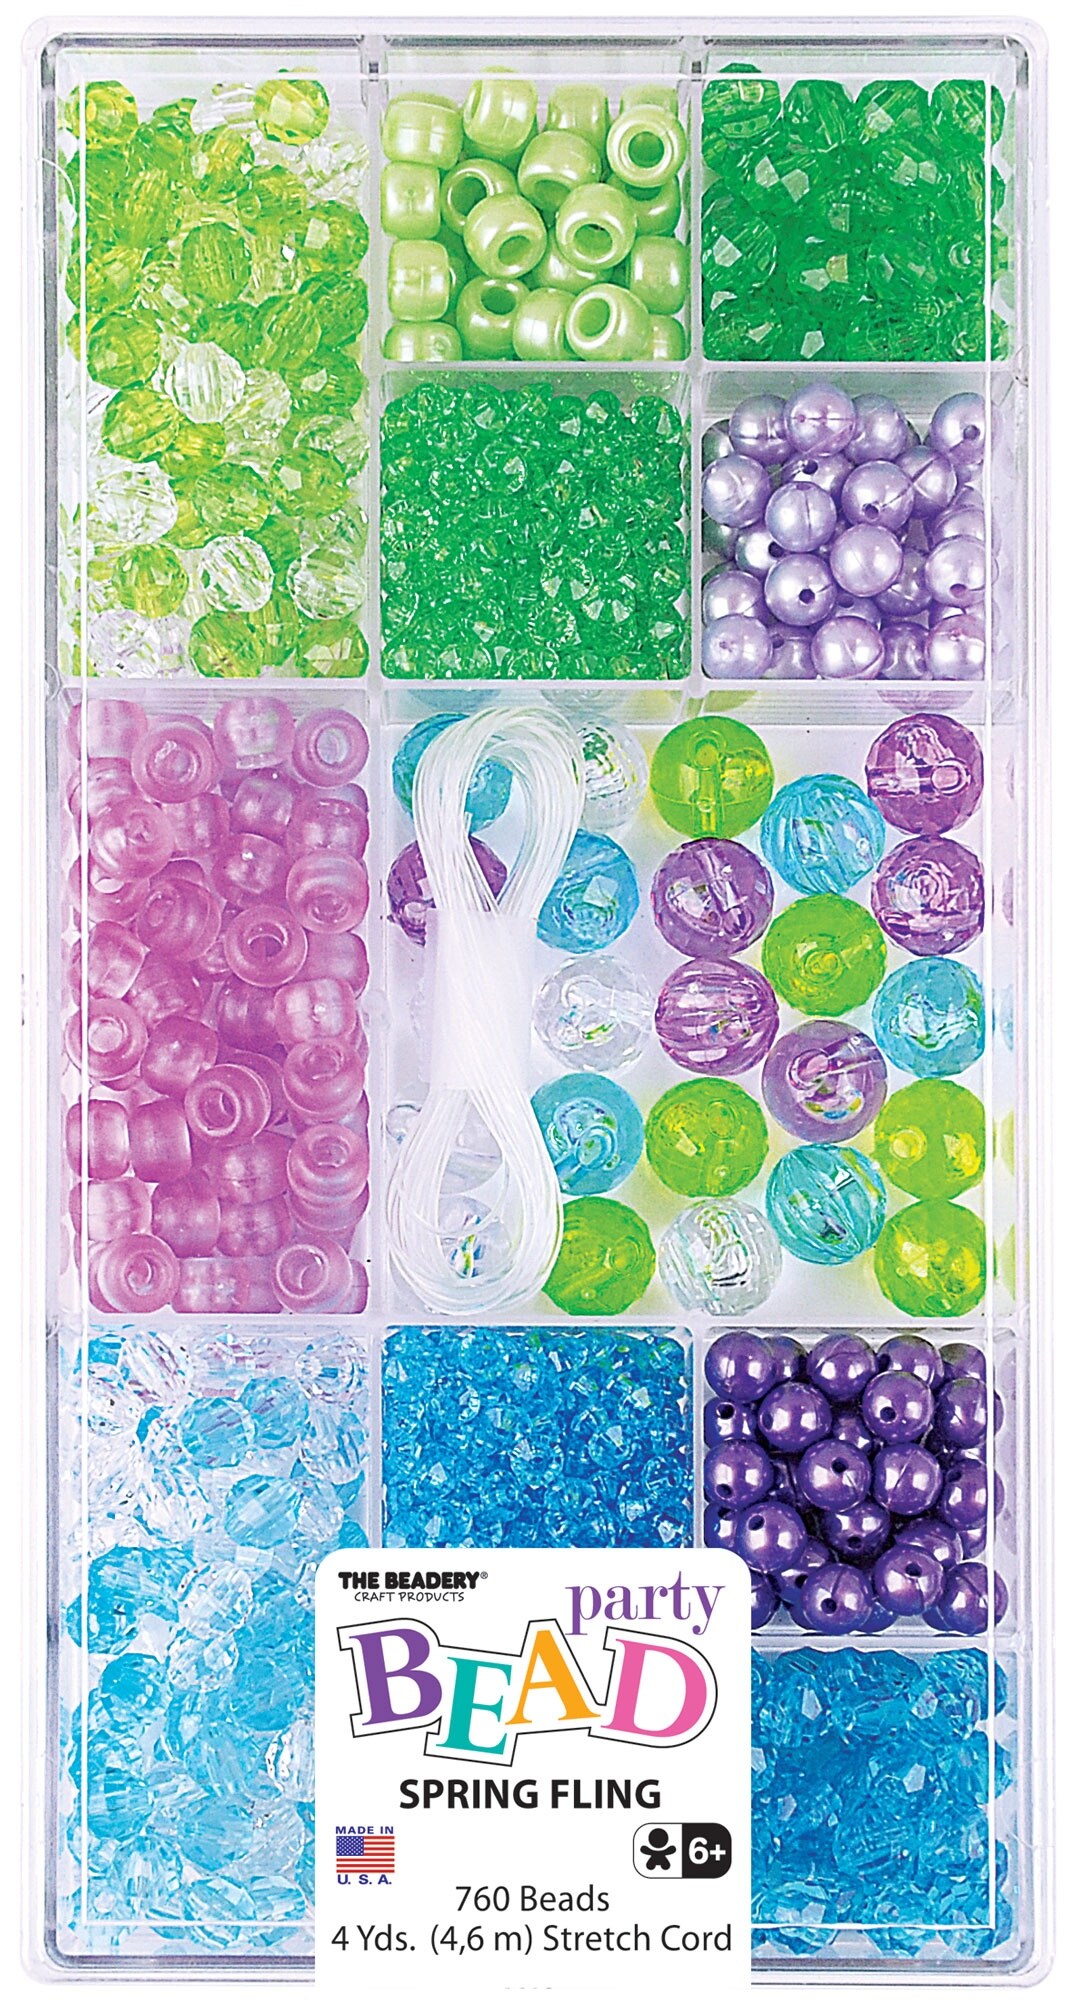 The Beadery 12 Compartment Bead Box-Spring Fling; 760 Beads